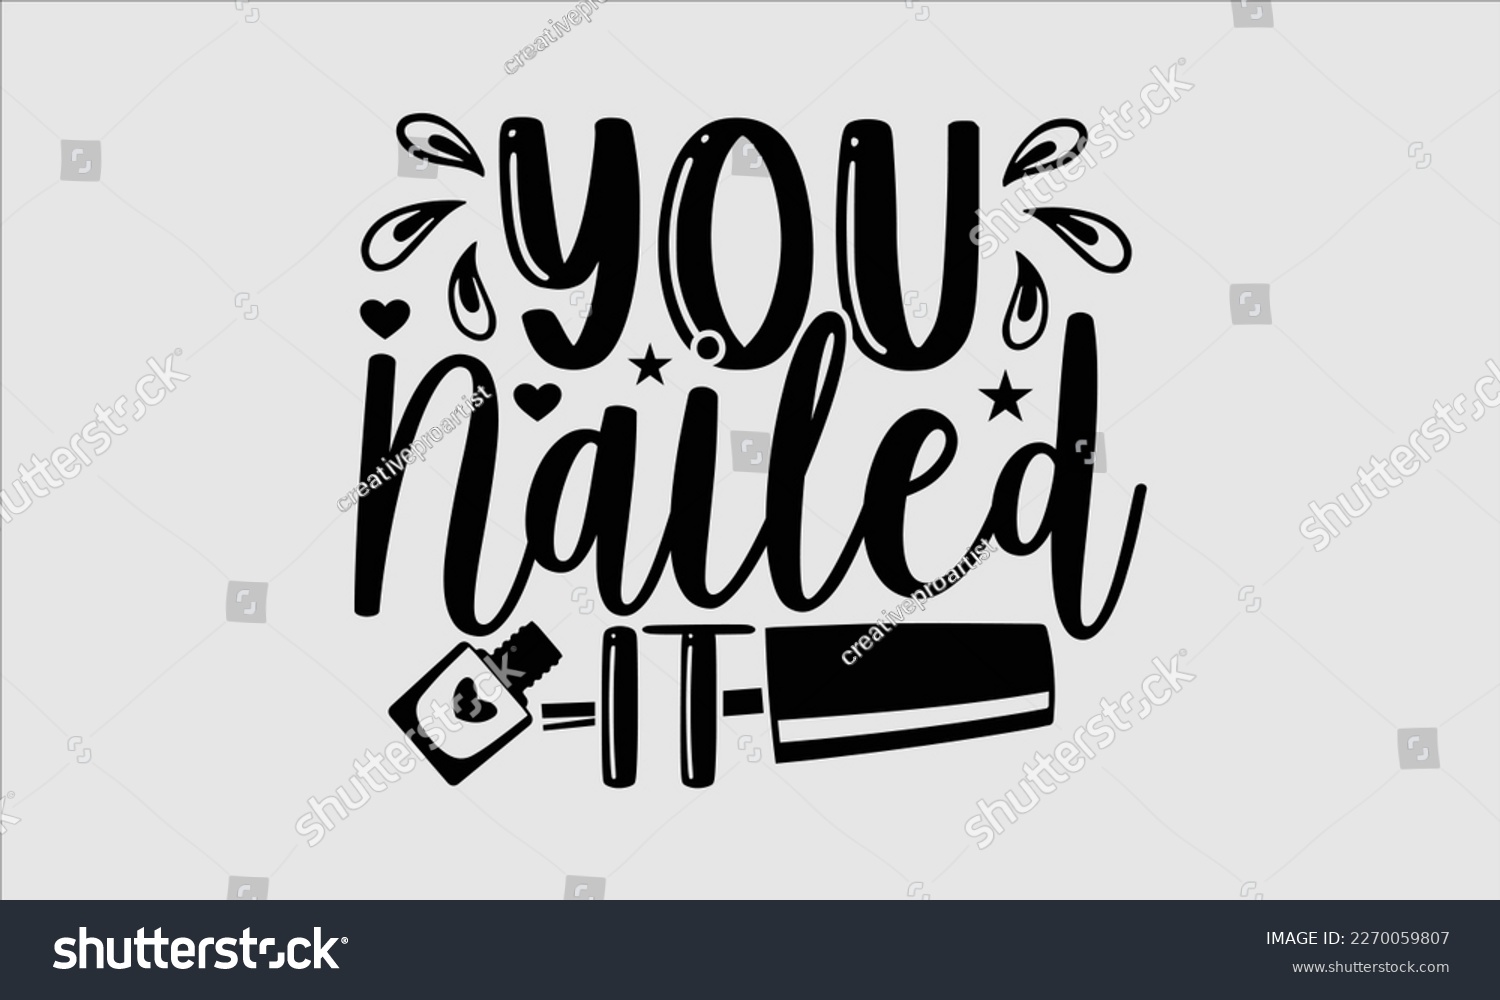 SVG of You nailed it- Nail Tech t shirts design, Hand written lettering phrase, Isolated on white background,  Calligraphy graphic for Cutting Machine, svg eps 10. svg